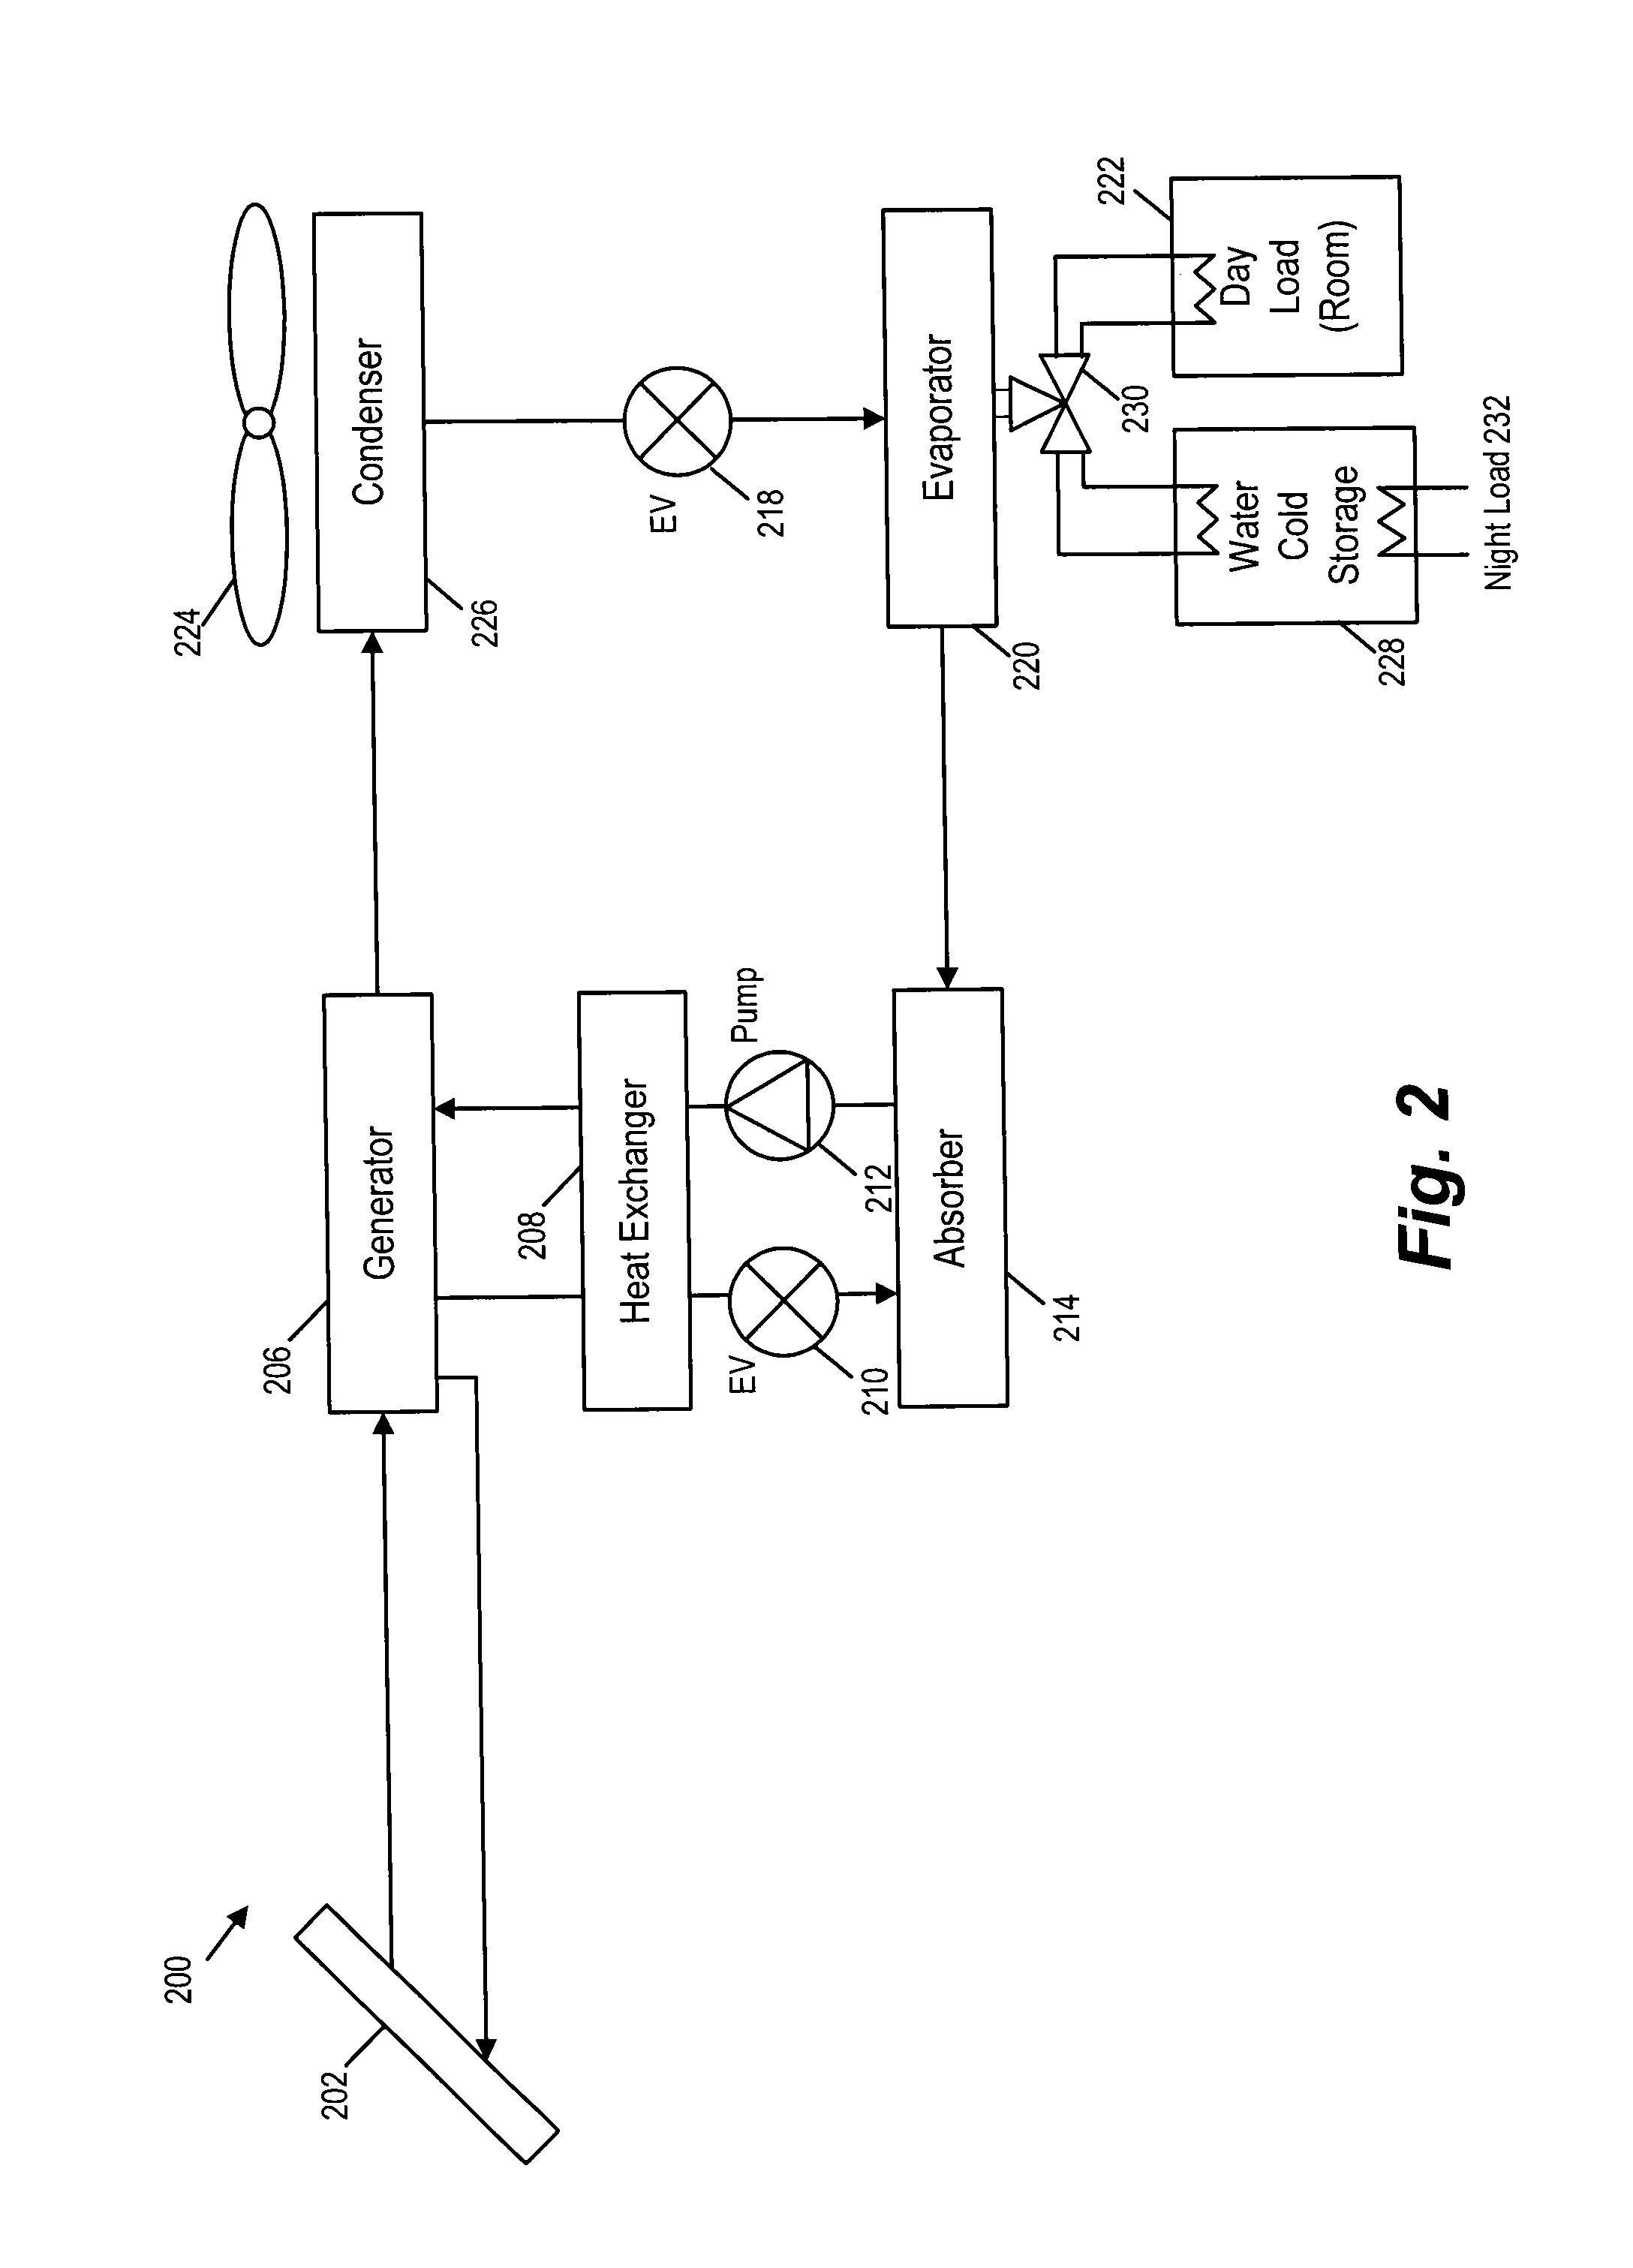 System and method for continuously operating a solar-powered air conditioner